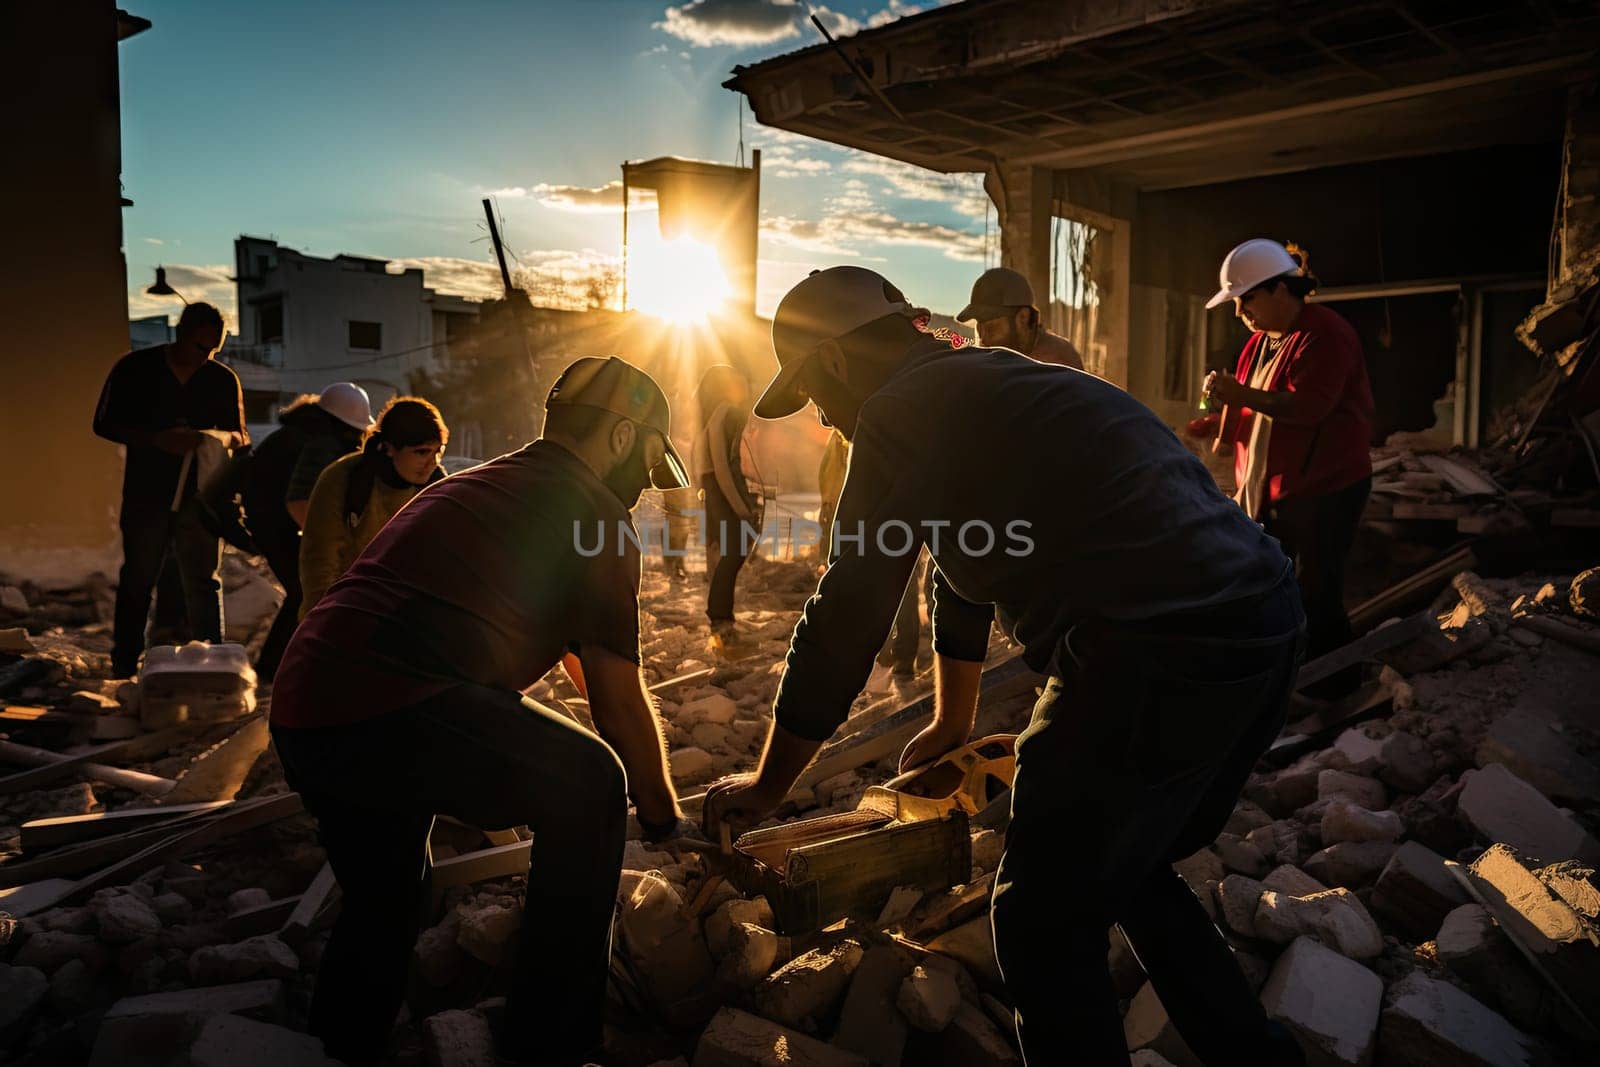 two men working on rubbles in front of a building with the sun shining through the window and behind them